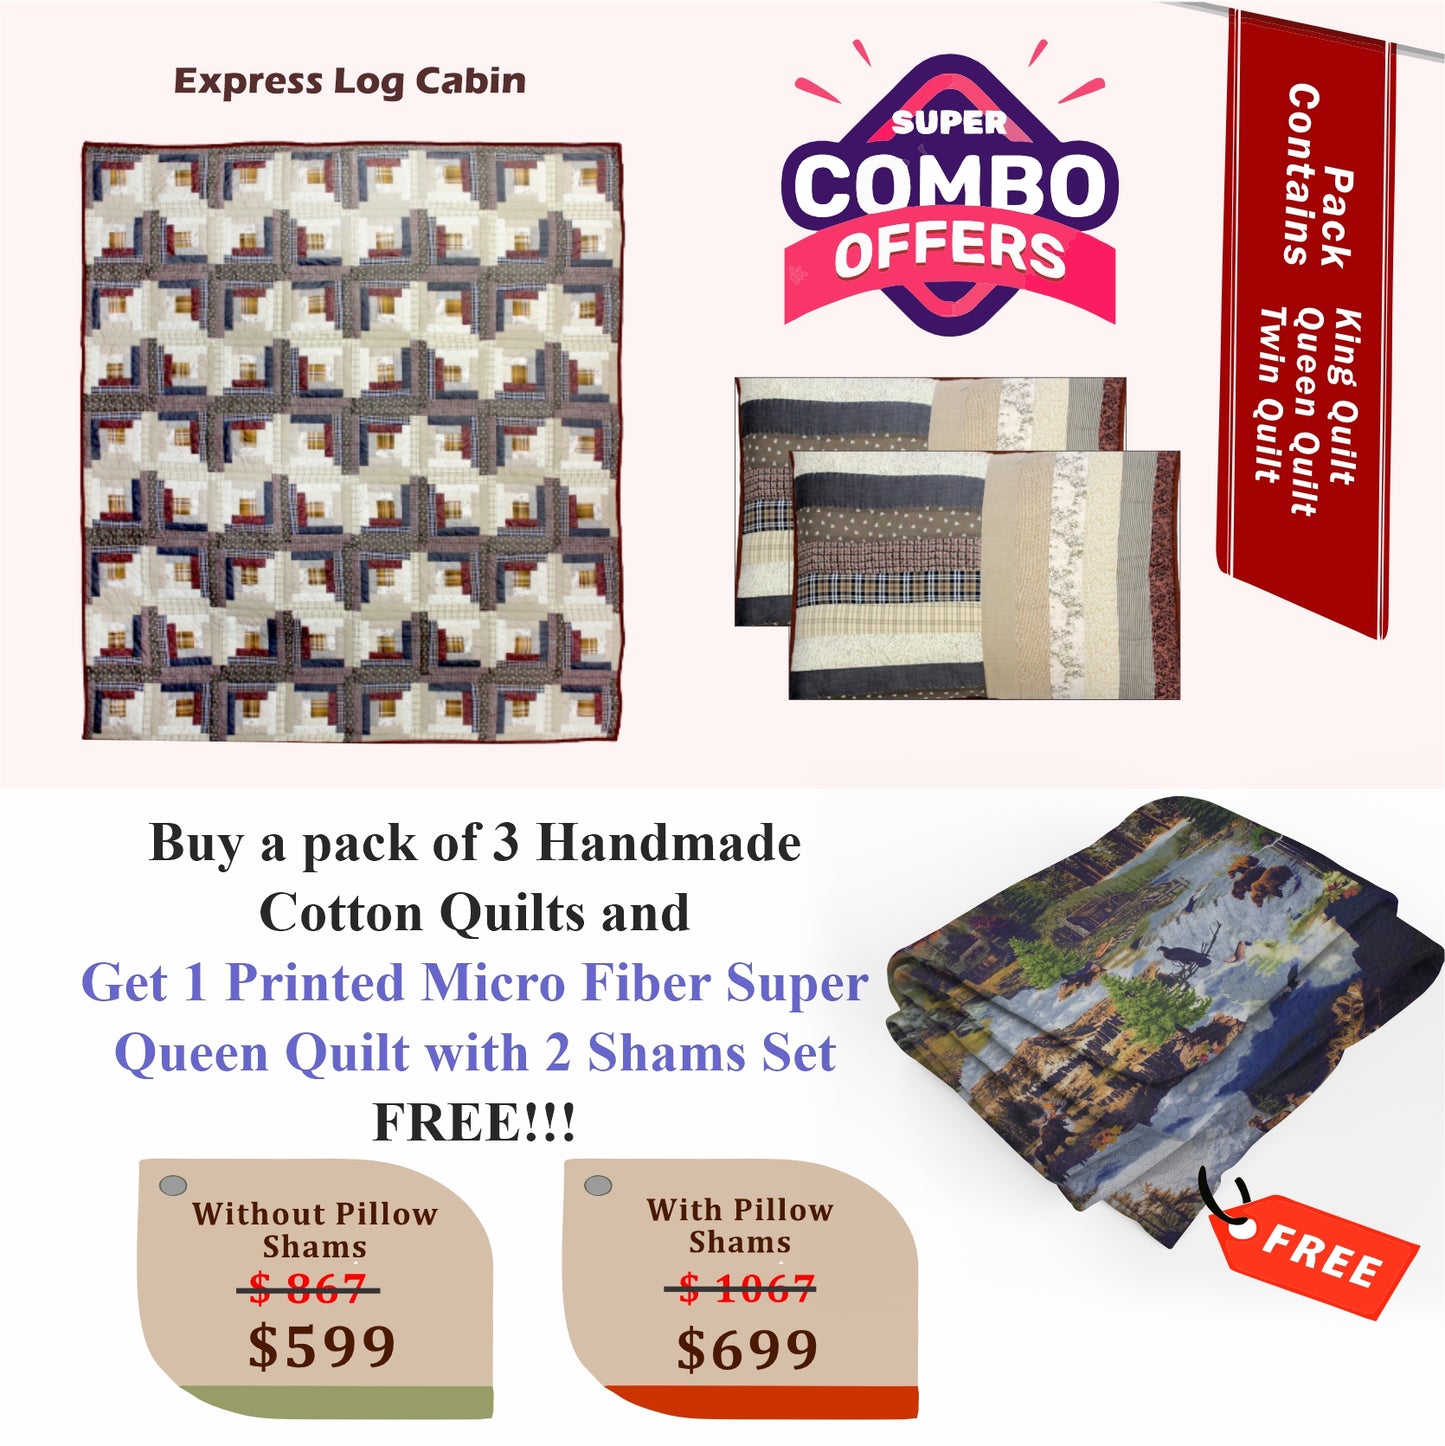 Express Log Cabin - Handmade Cotton quilts | Matching pillow shams | Buy 3 cotton quilts and get 1 Printed Microfiber Super Queen Quilt with 2 Shams set FREE